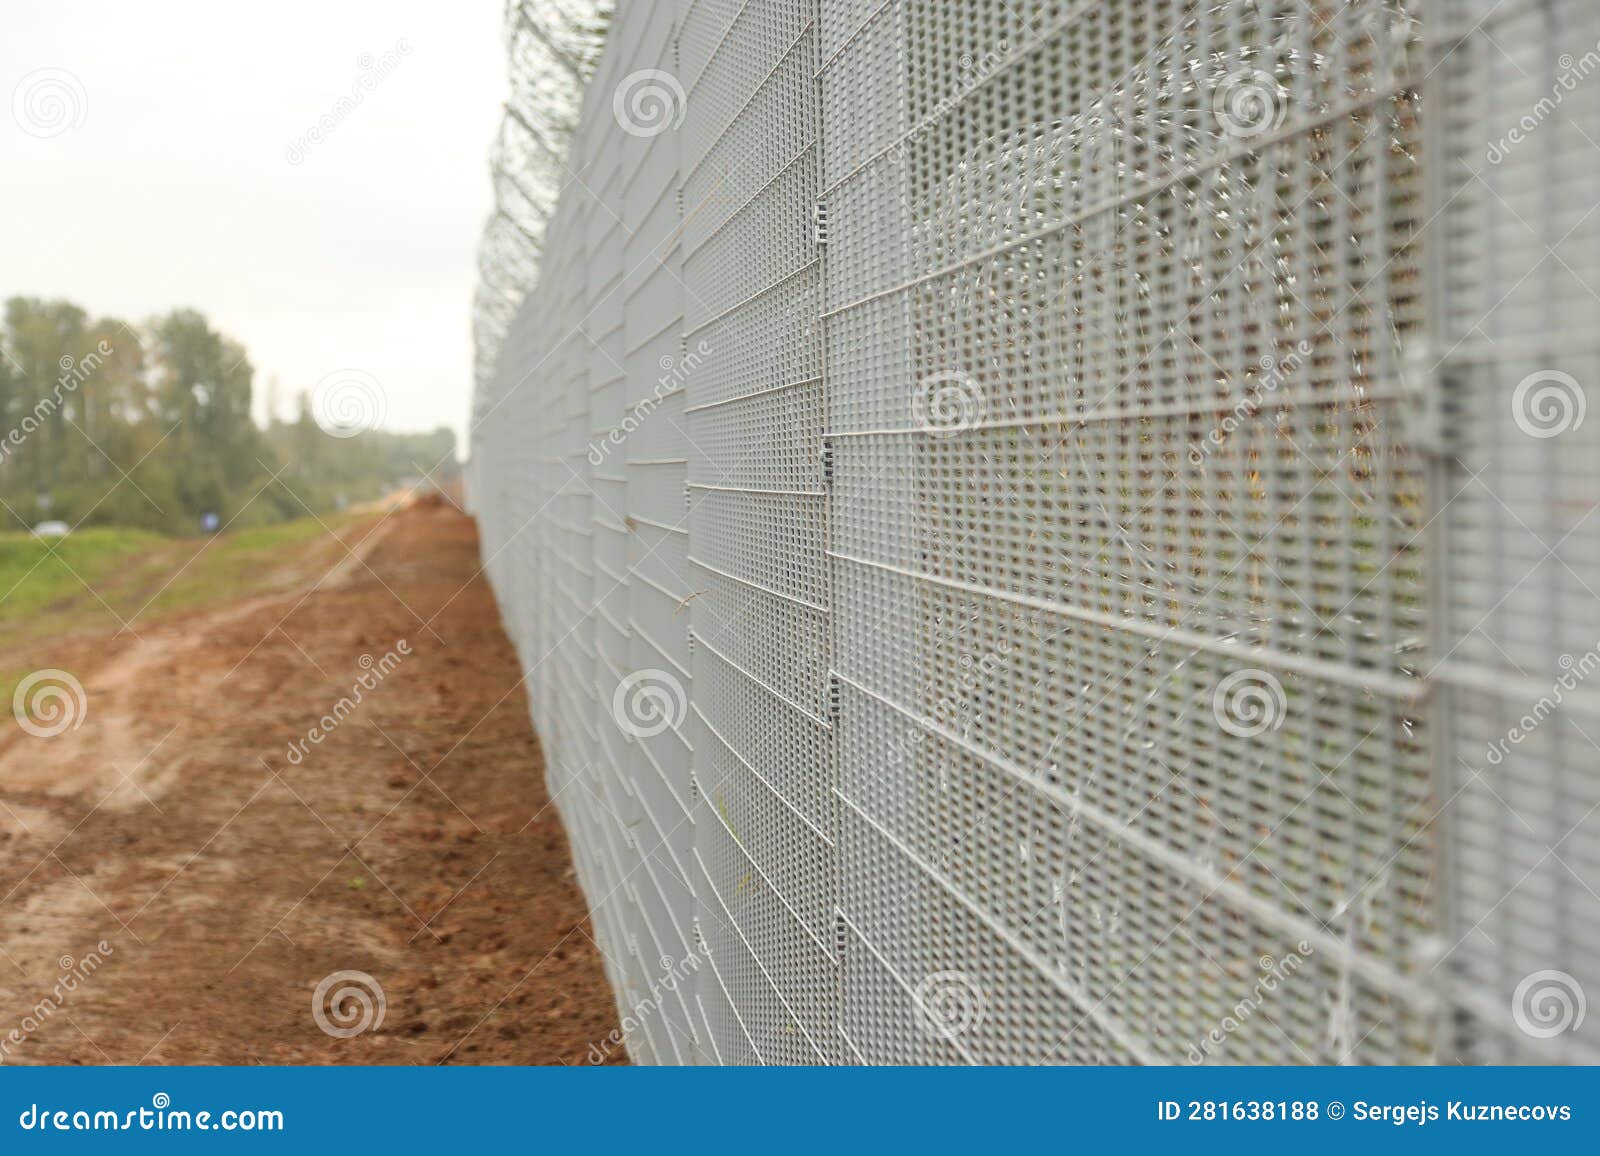 barbed wire steel wall against the immigrations in europe